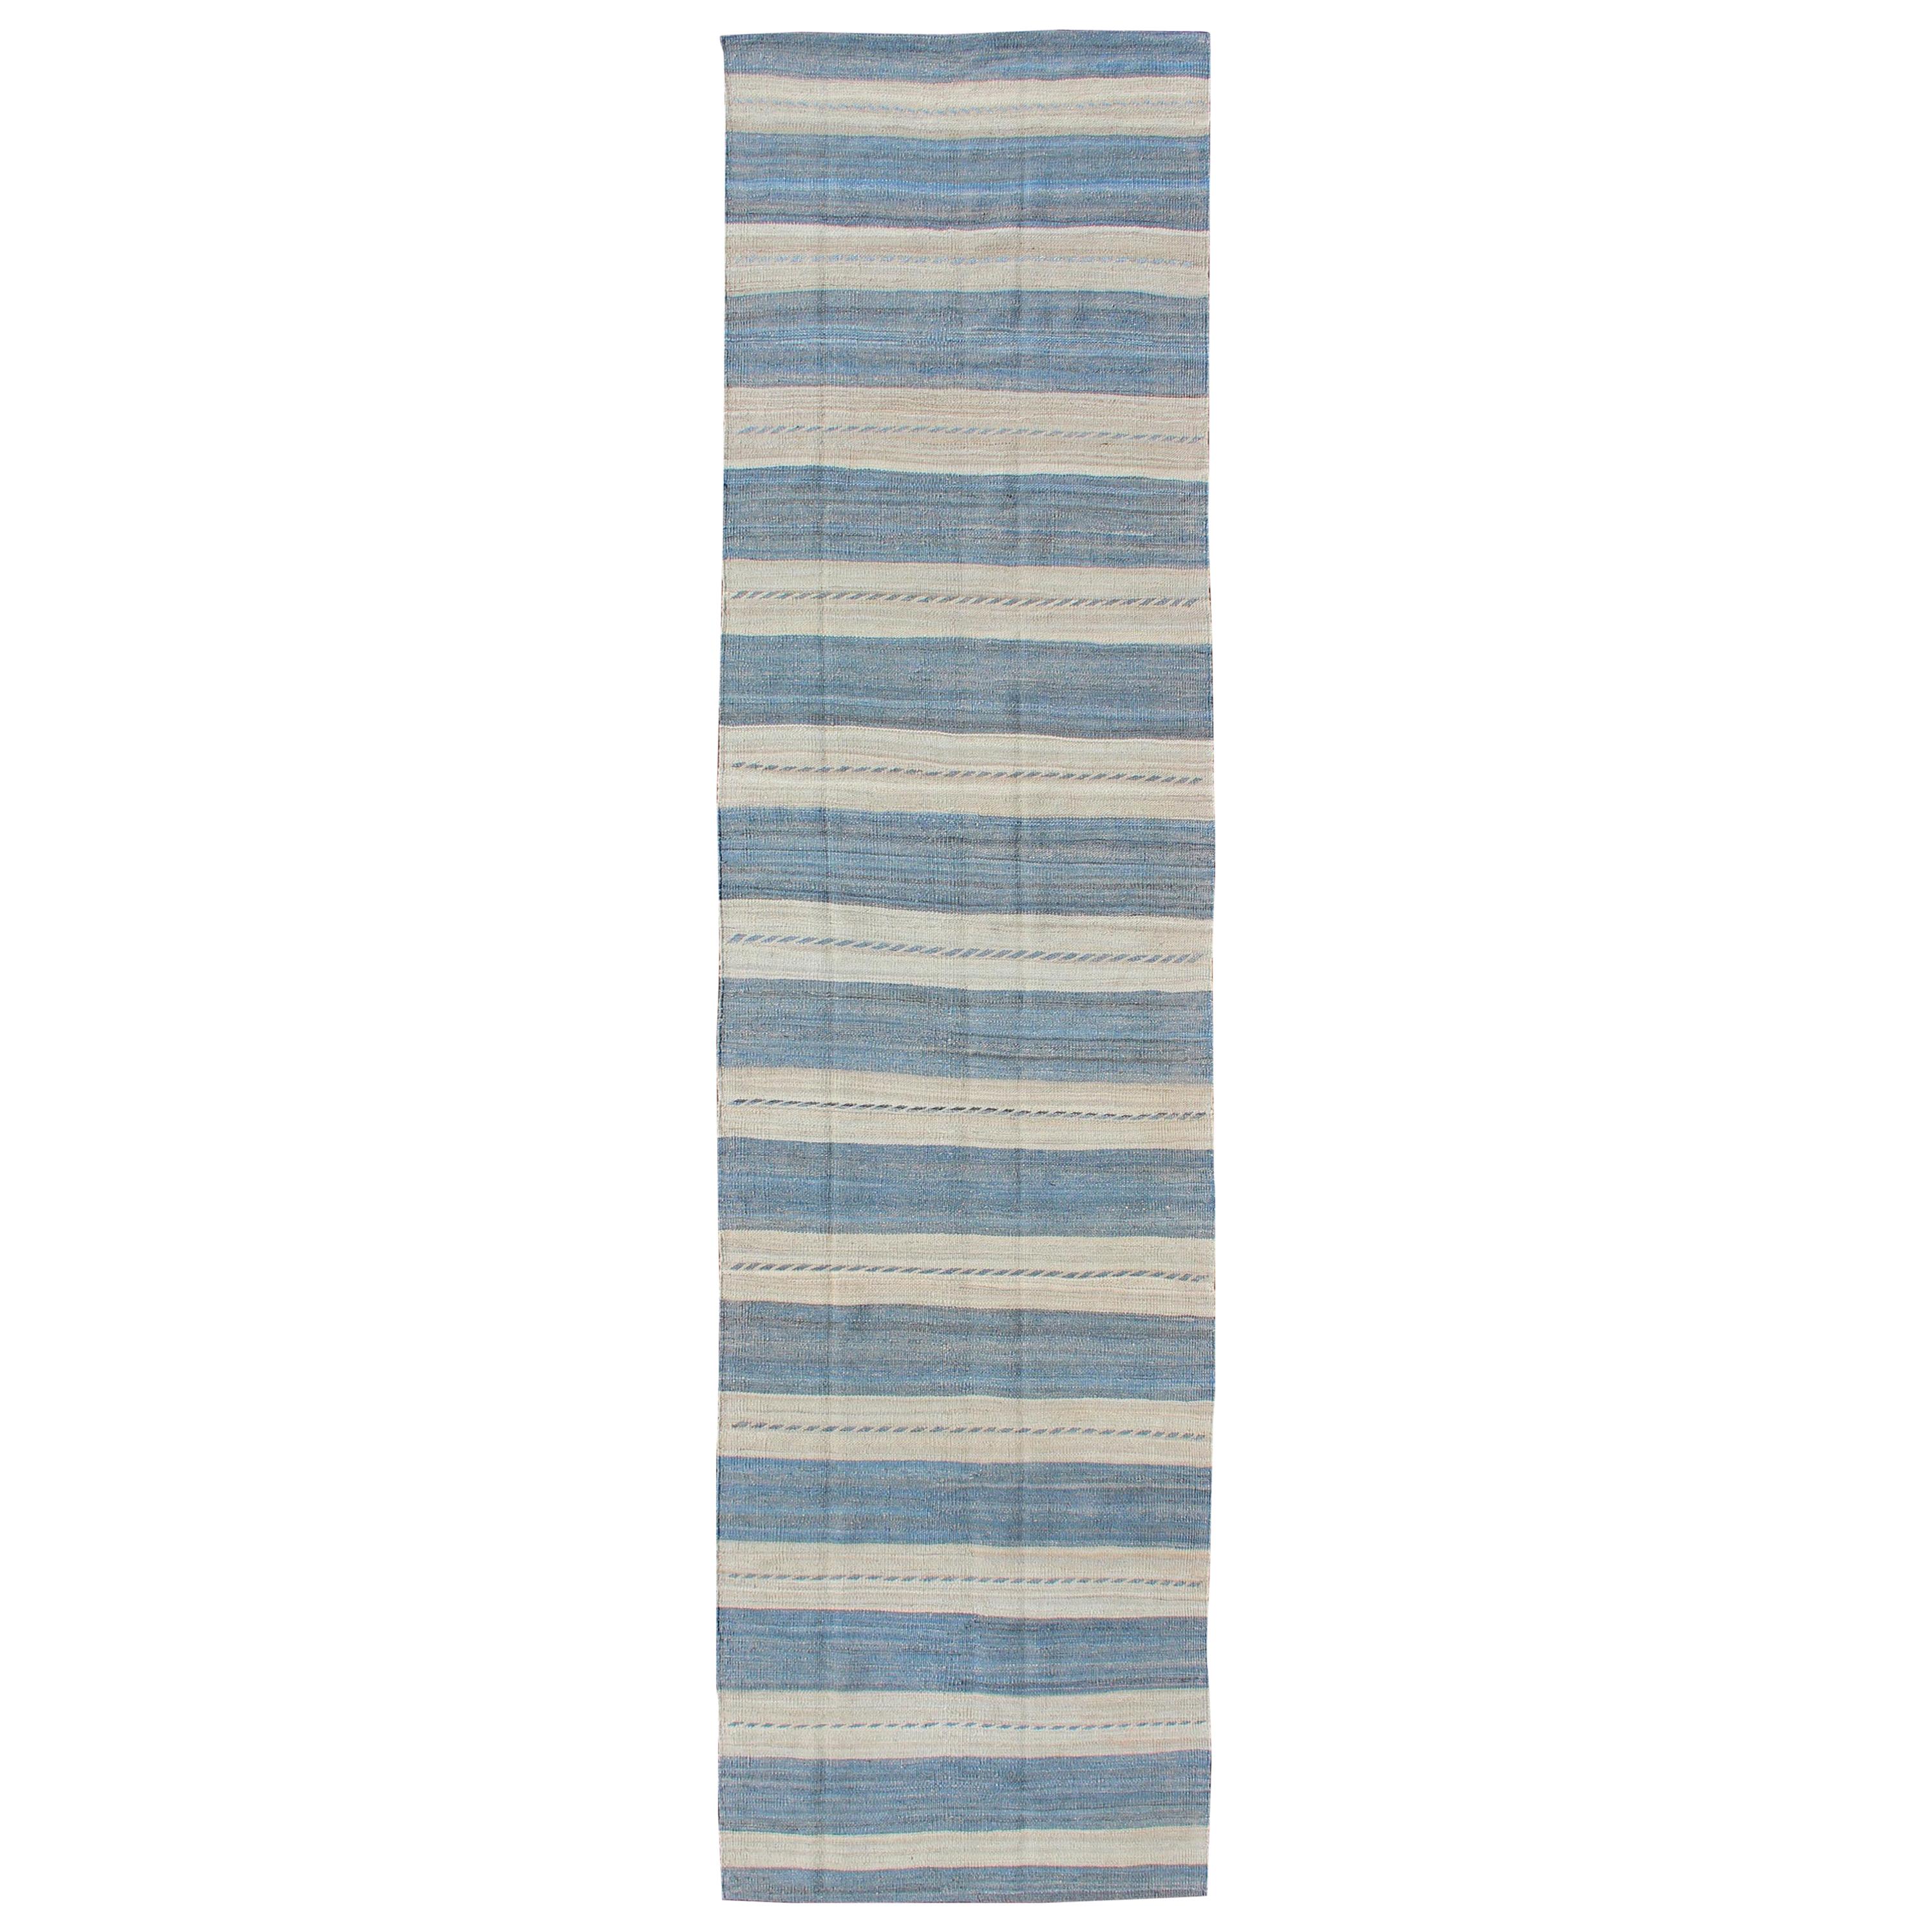 Flat-Weave Modern Kilim Rug with Stripes in Shades of Blue and Ivory